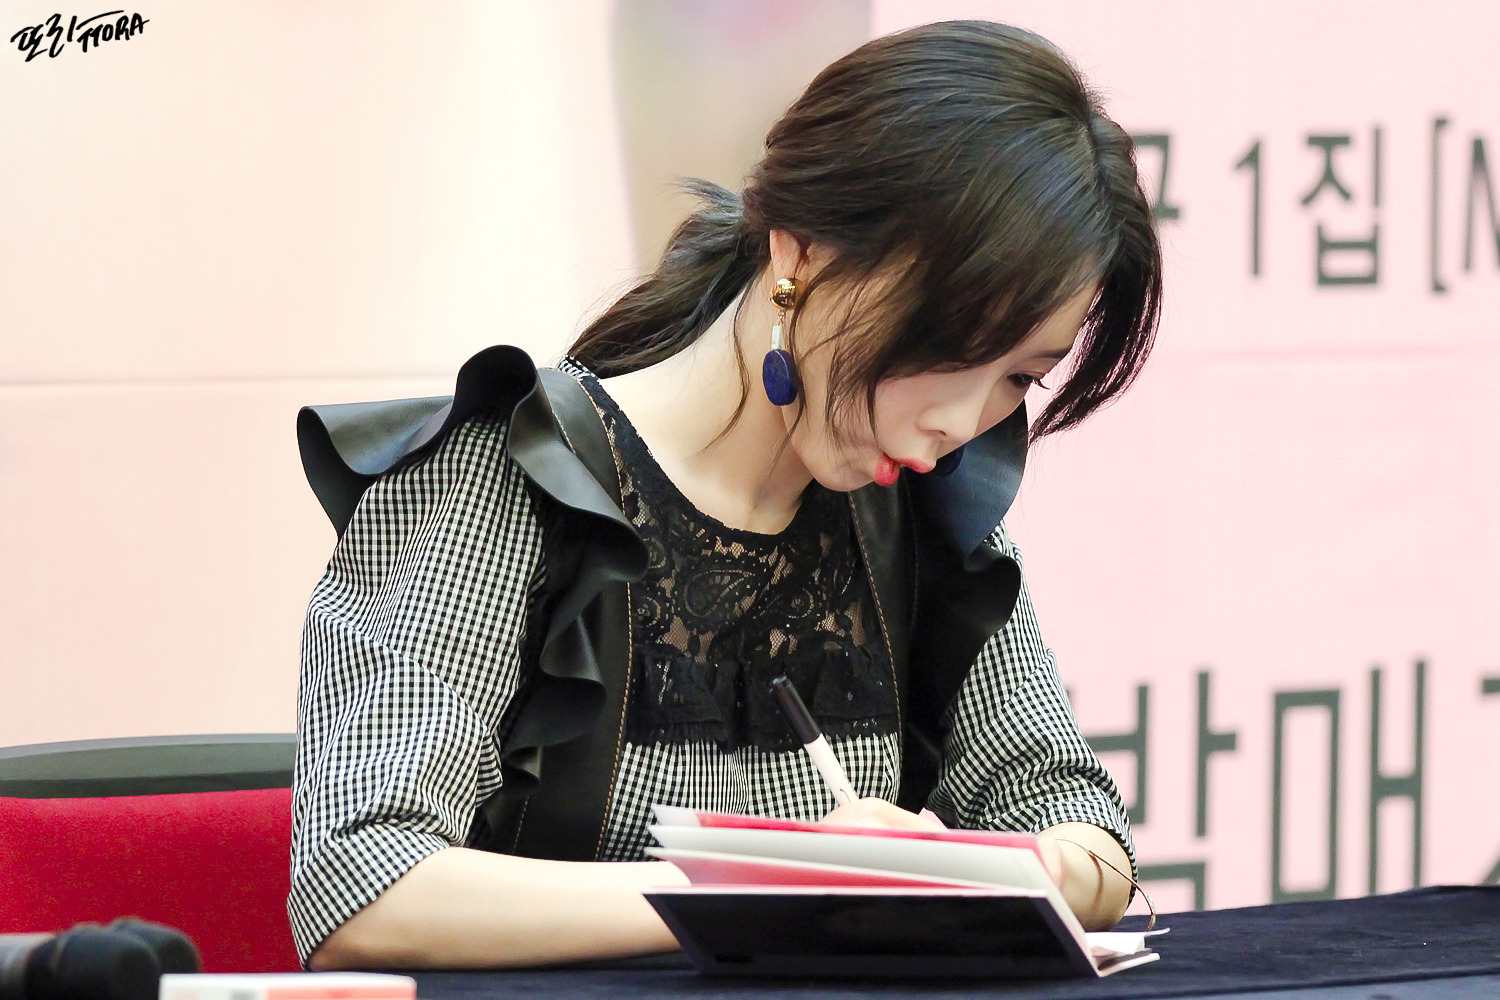 [PIC][16-04-2017]TaeYeon tham dự buổi Fansign cho “MY VOICE DELUXE EDITION” tại AK PLAZA vào chiều nay  - Page 5 2452A8375903688C212176